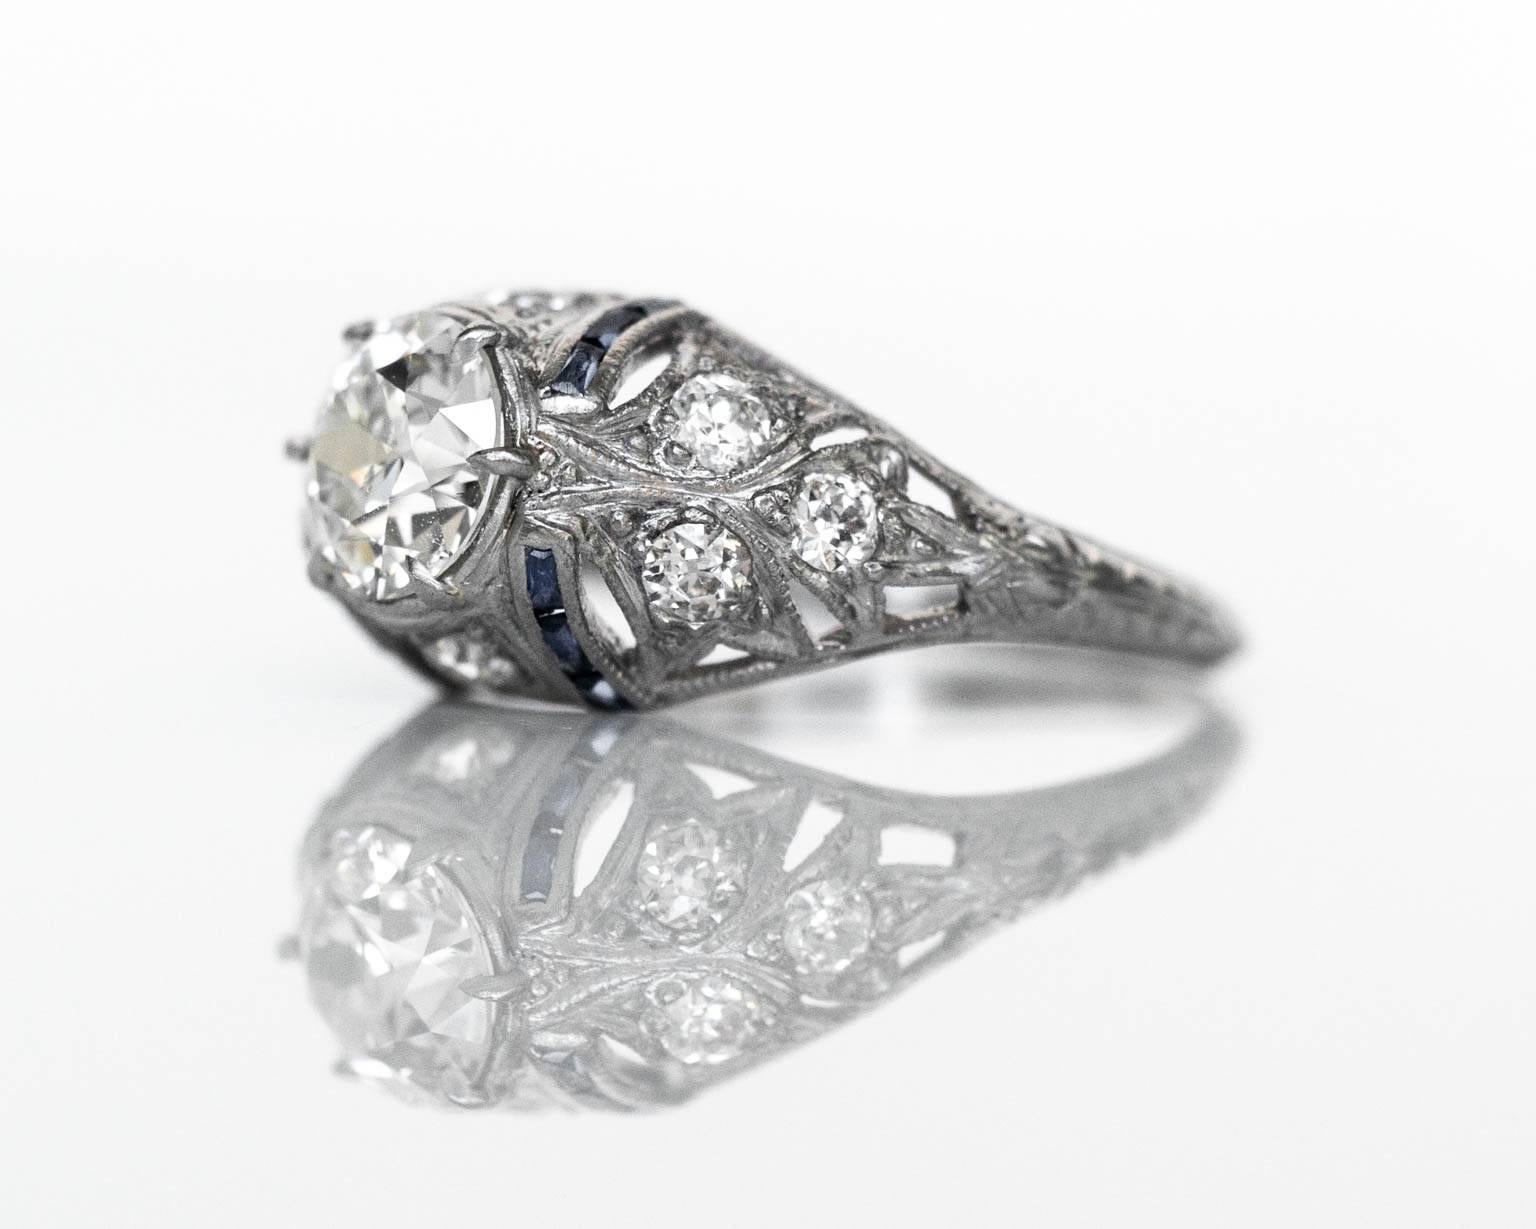 1920s Platinum Art Deco 1.03 carat Diamond Engagement Ring with Side Stones & Natural Sapphires

Item Details: 
Ring Size: 7
Metal Type: Platinum
Weight: 3.3 grams

Center Diamond Details:
Shape: Round 
Carat Weight: 1.03 carat
Color: I